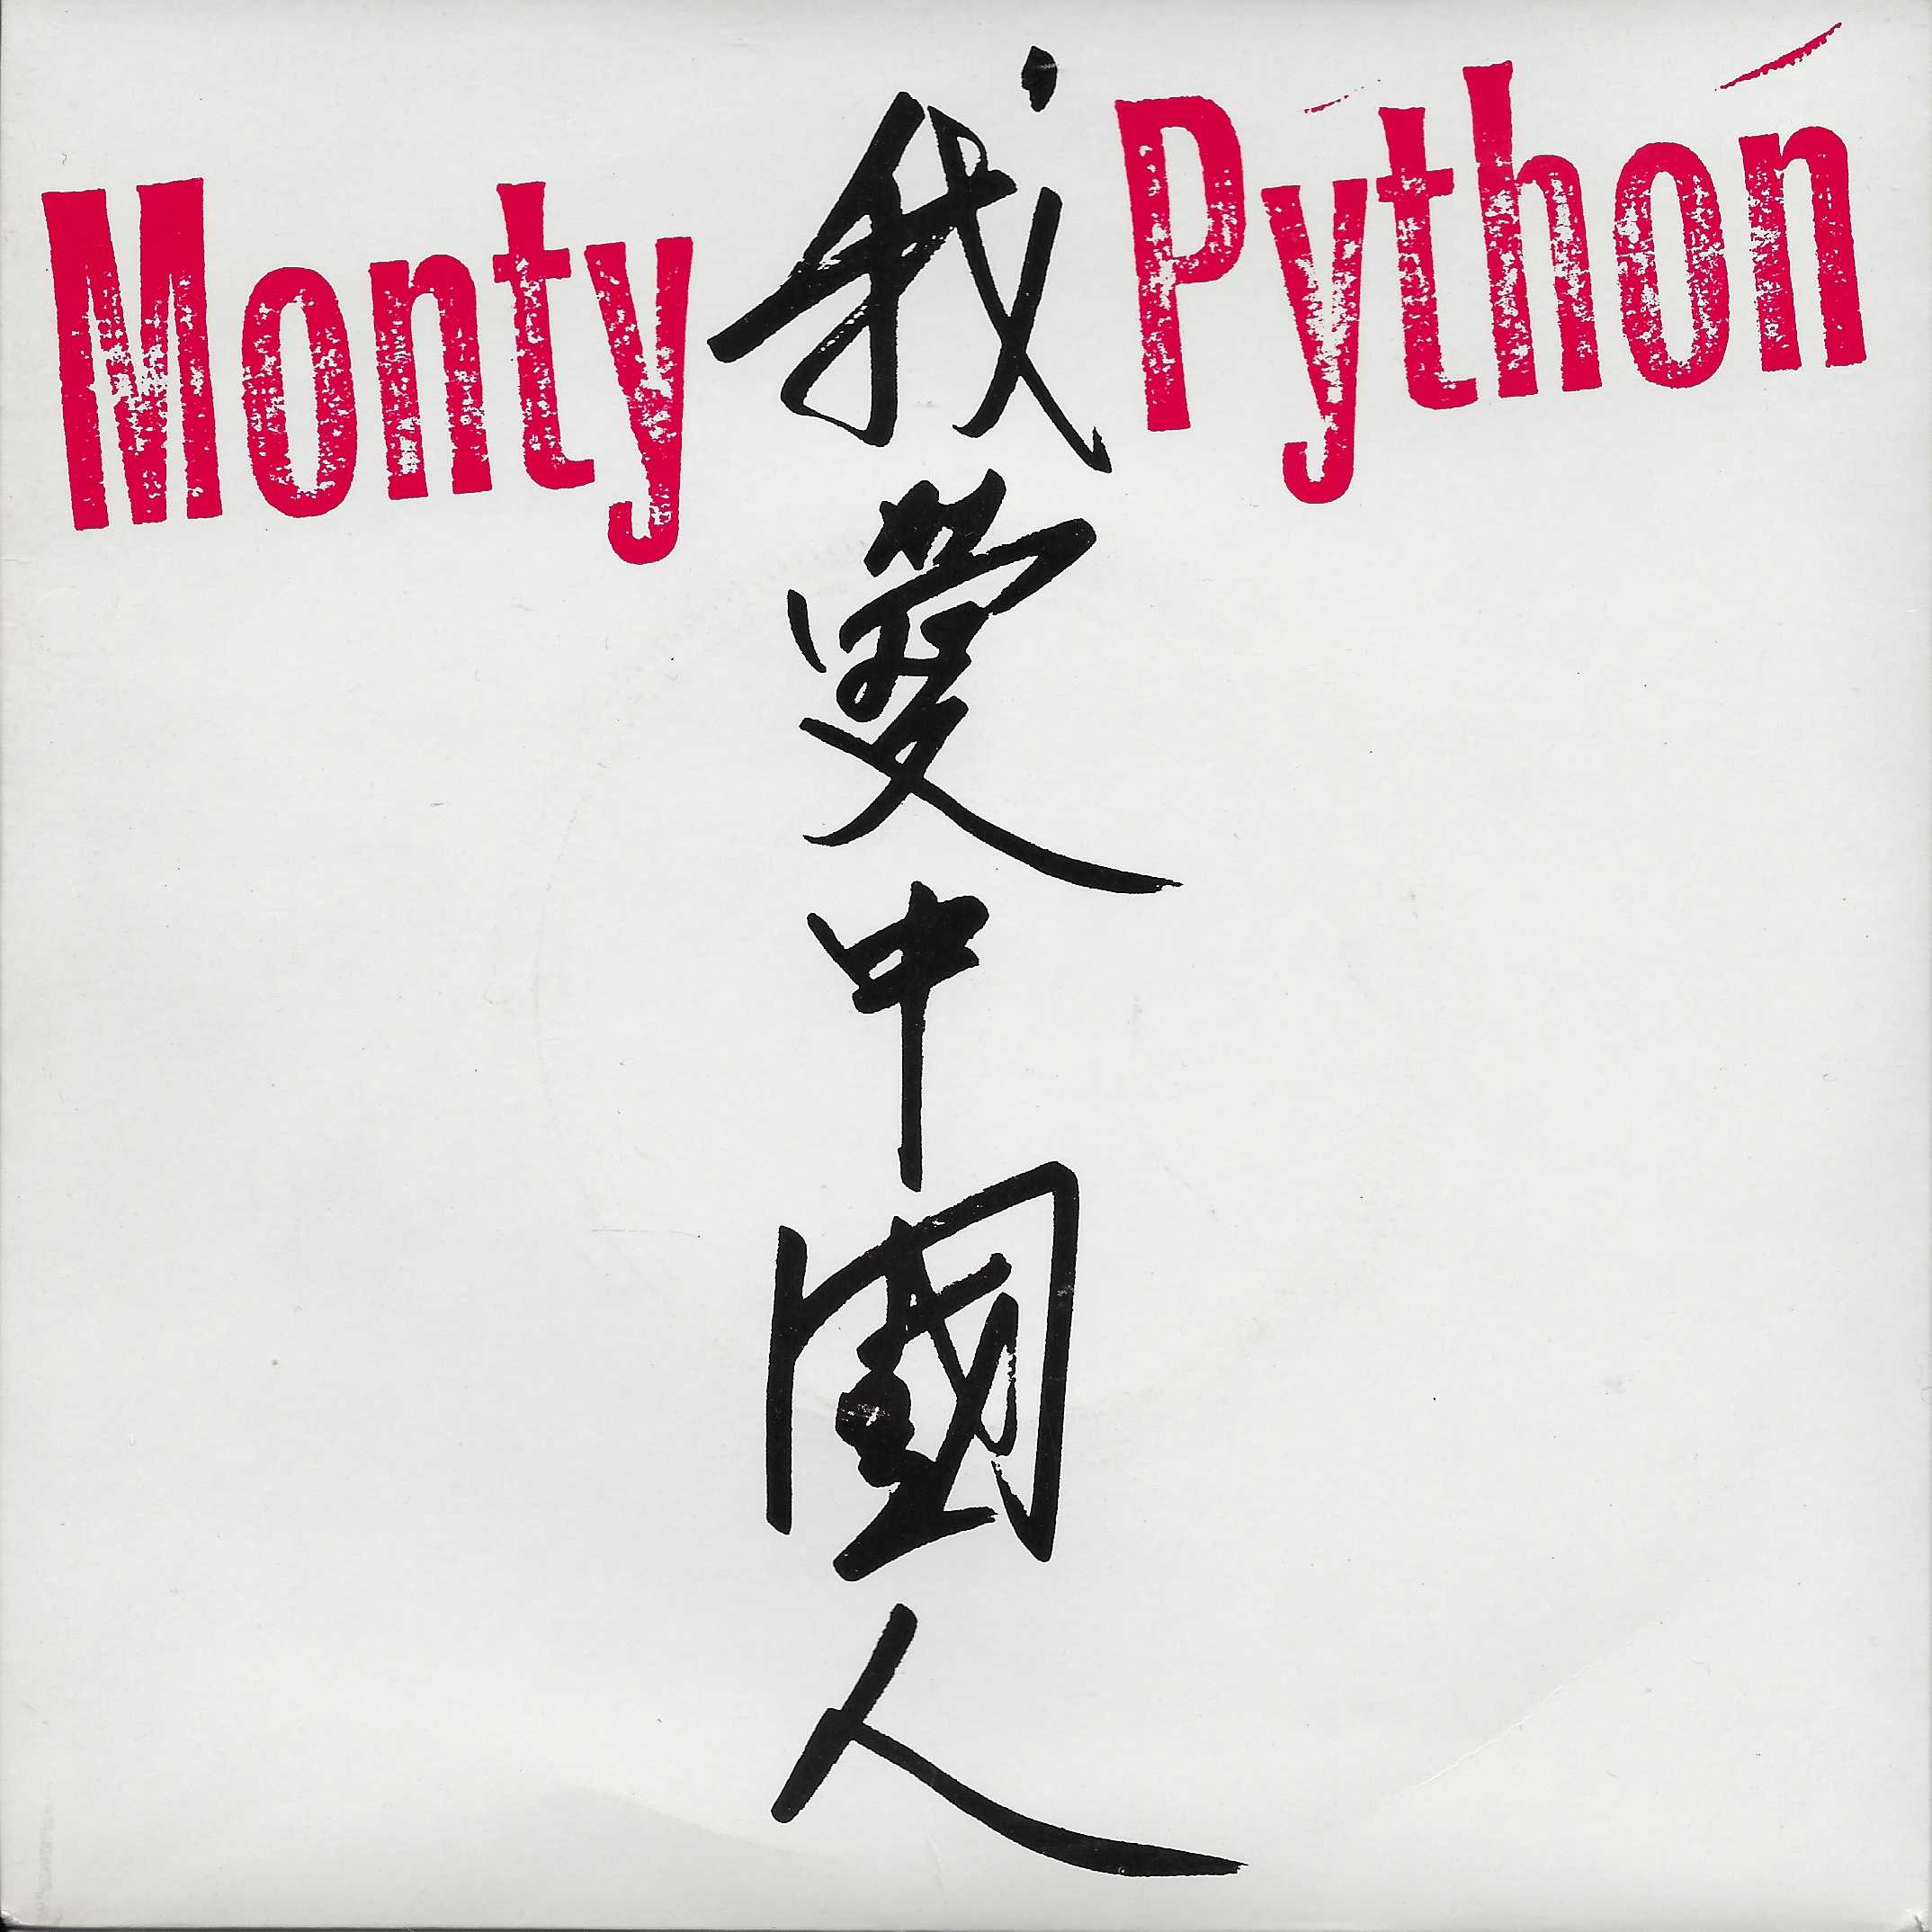 Picture of I like Chinese (Monty Python's flying circus) by artist Monty Python from the BBC singles - Records and Tapes library